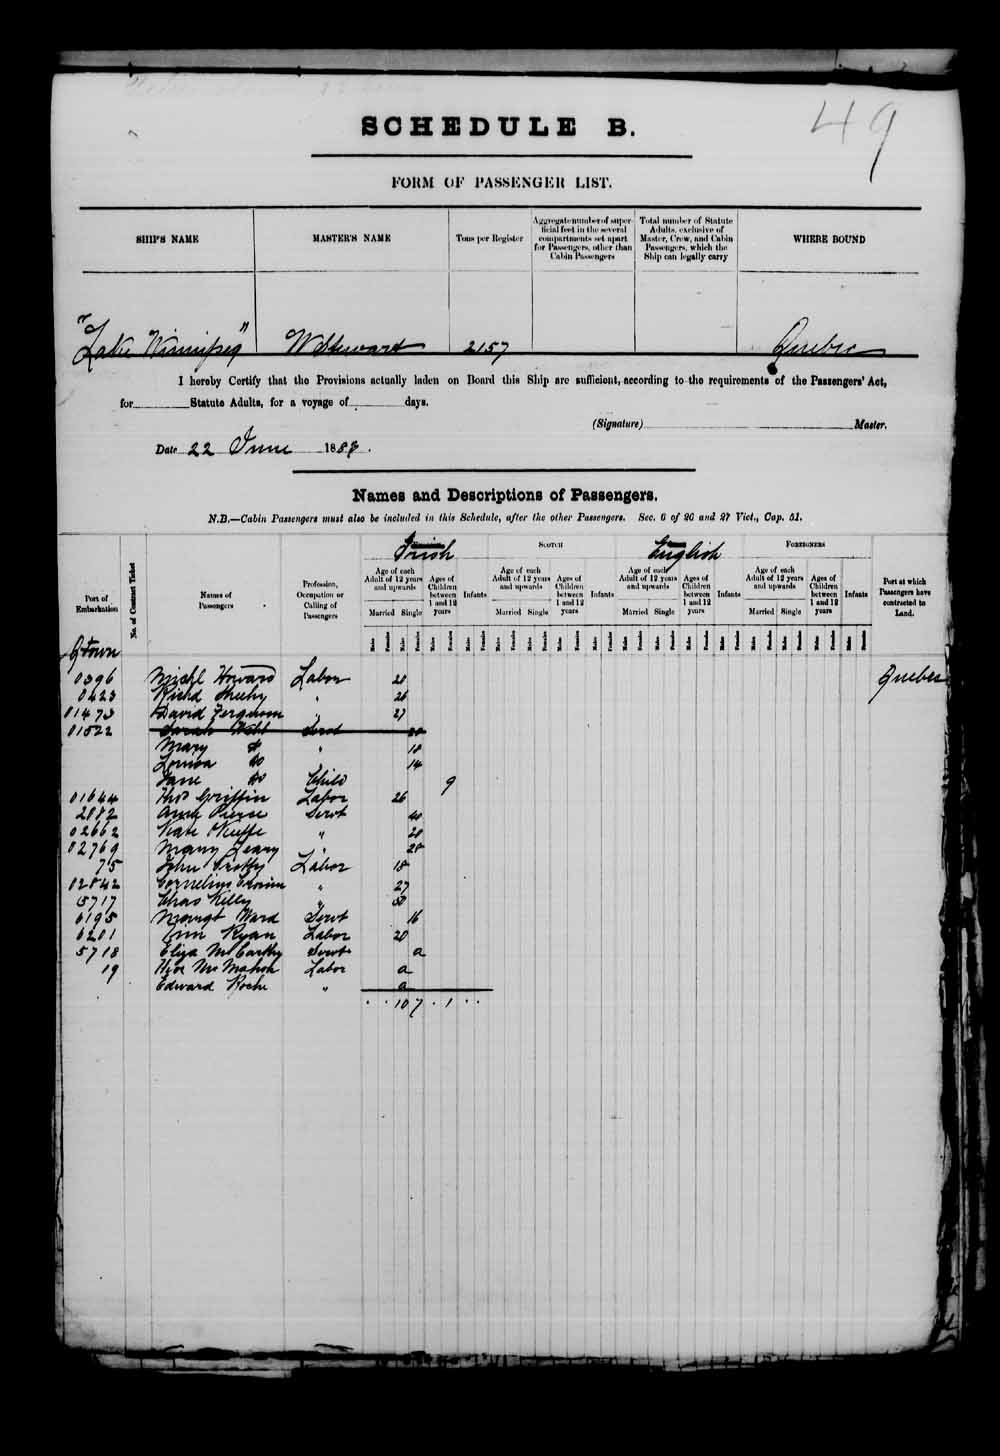 Digitized page of Passenger Lists for Image No.: e003543413